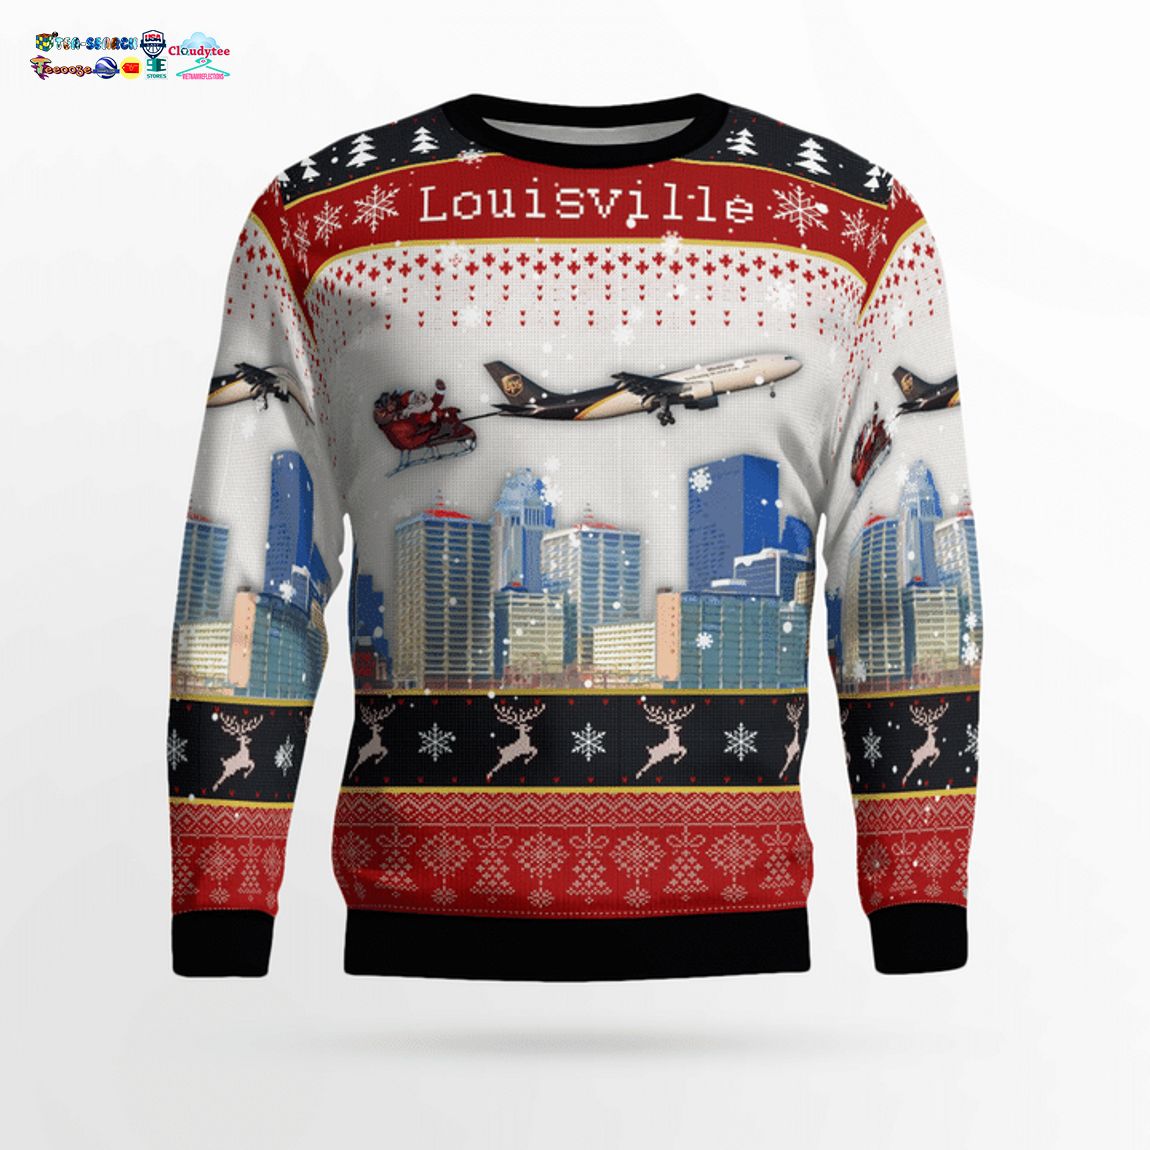 UPS Airlines Airbus A300F4-622R With Santa Over Louisville 3D Christmas Sweater